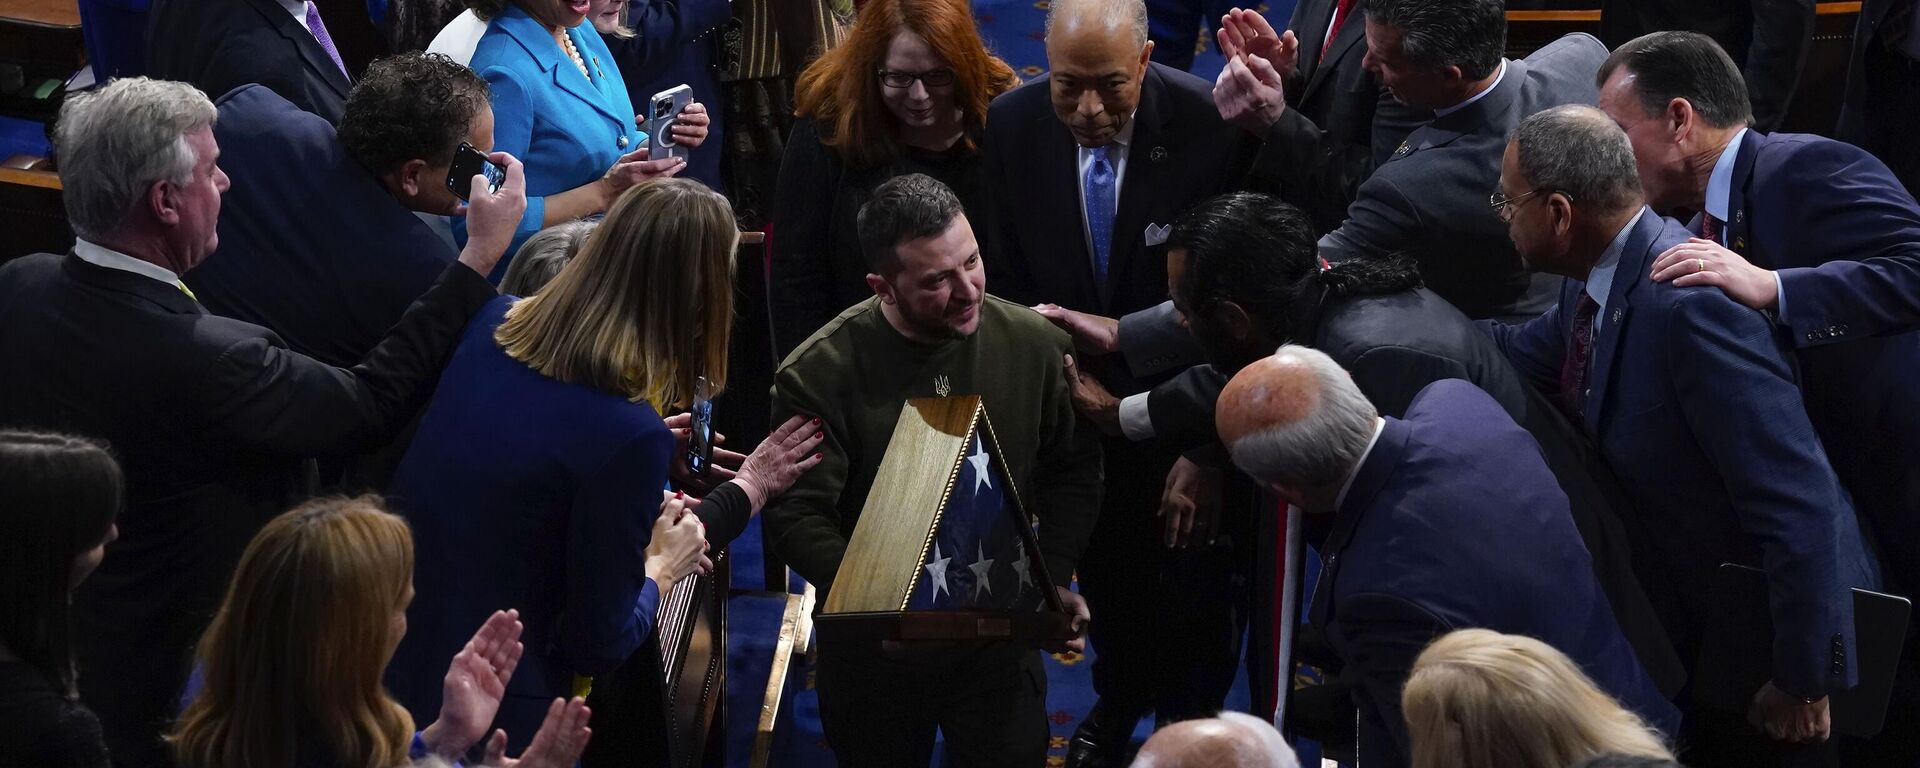 Ukrainian President Volodymyr Zelenskyy holds an American flag that was gifted to him by House Speaker Nancy Pelosi of Calif., as he leaves after addressing a joint meeting of Congress on Capitol Hill in Washington, Wednesday, Dec. 21, 2022. - Sputnik International, 1920, 12.01.2023